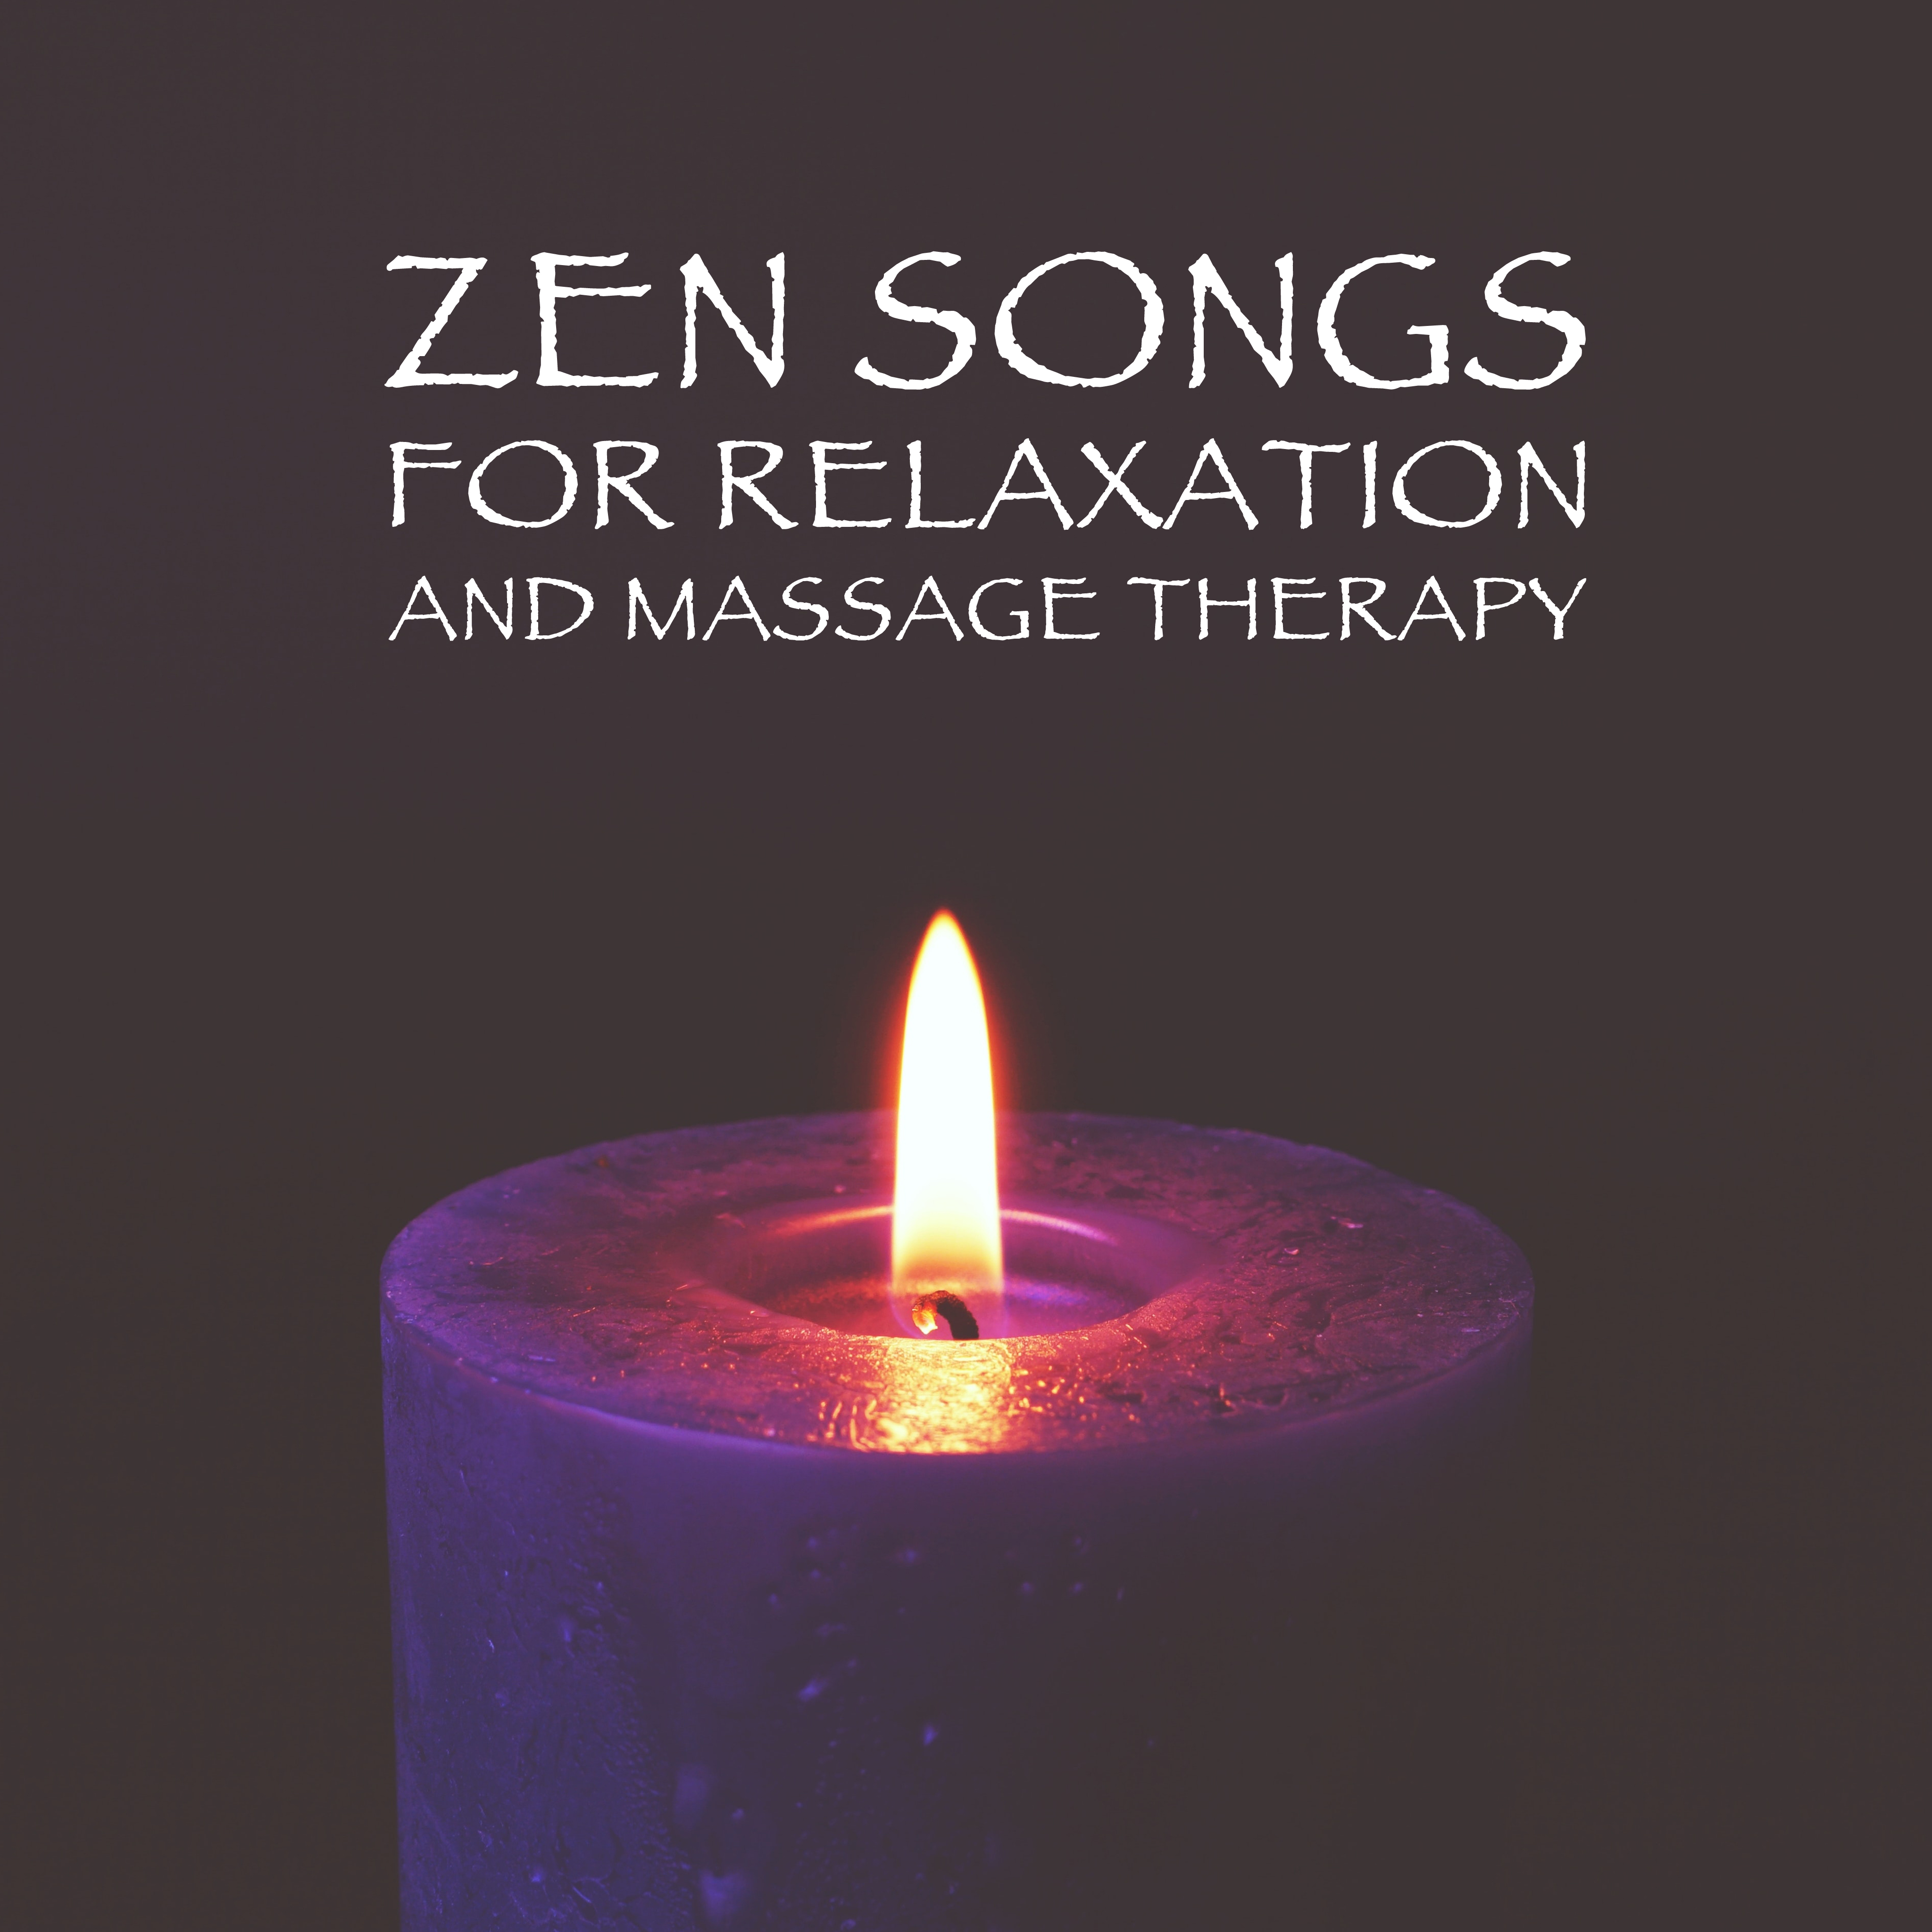 12 Zen Songs for Relaxation and Massage Therapy